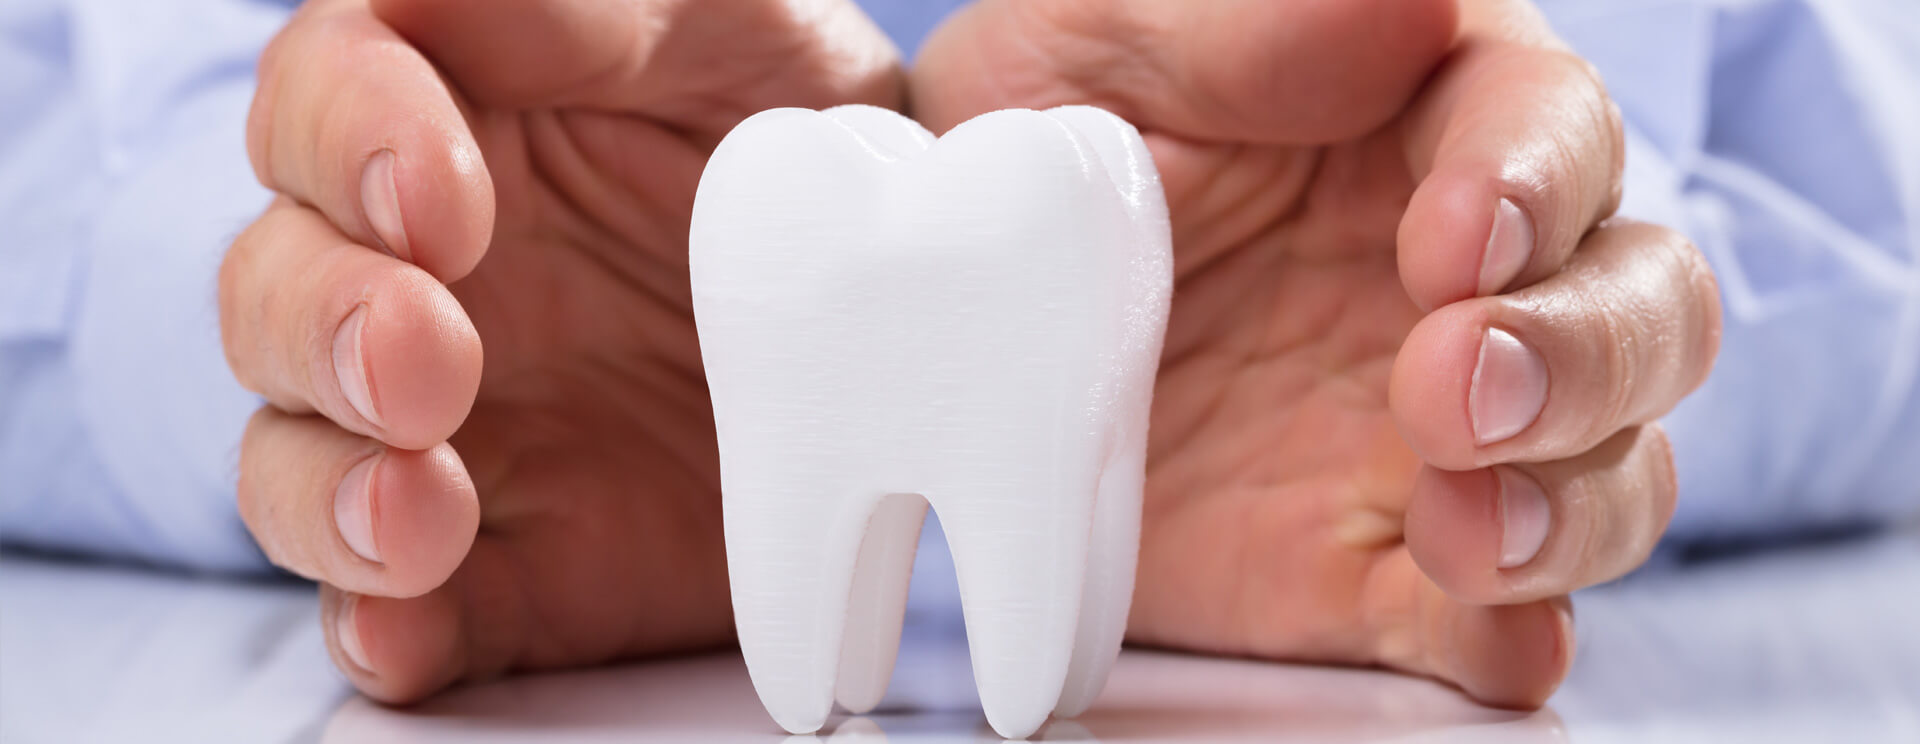 Tooth structure protected with 2 hands